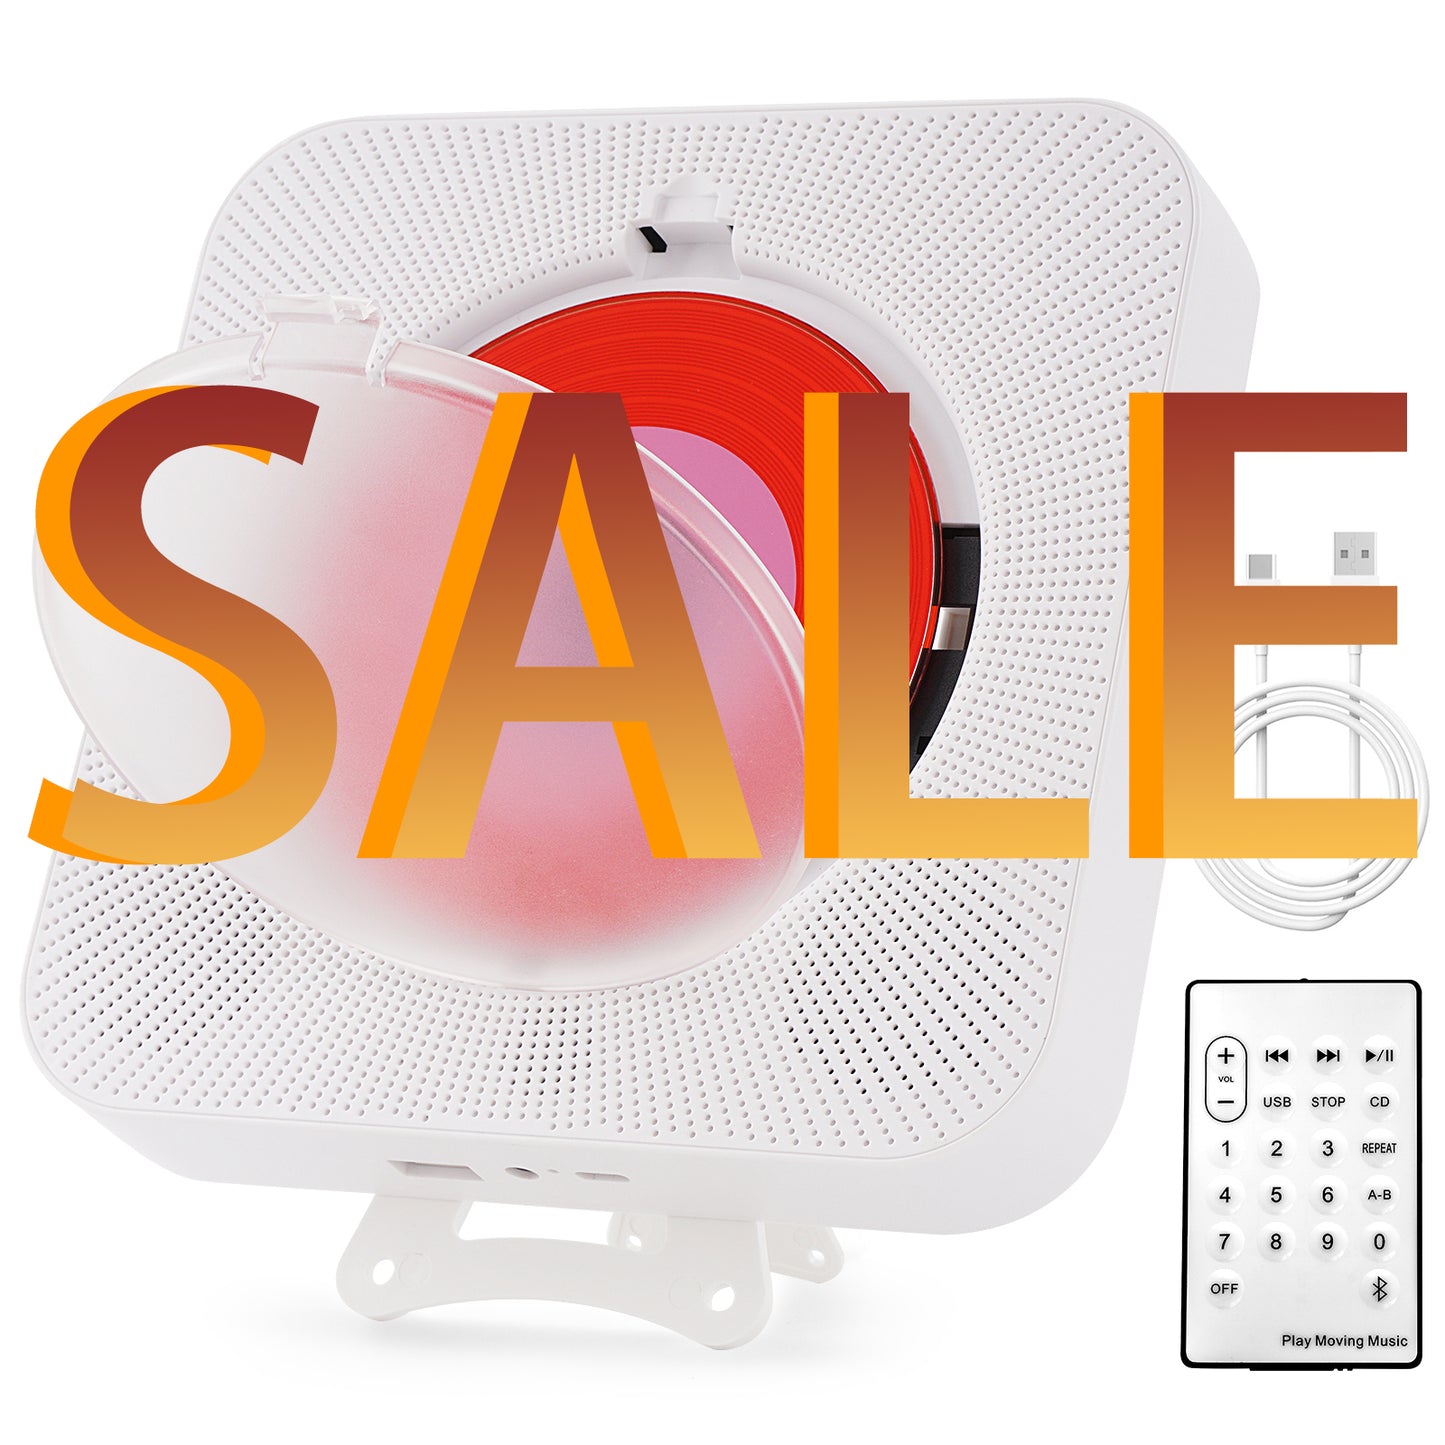 【Clearance Sale】Yintiny WHITE CD Player With Speaker, Portable CD Player For Home Decor